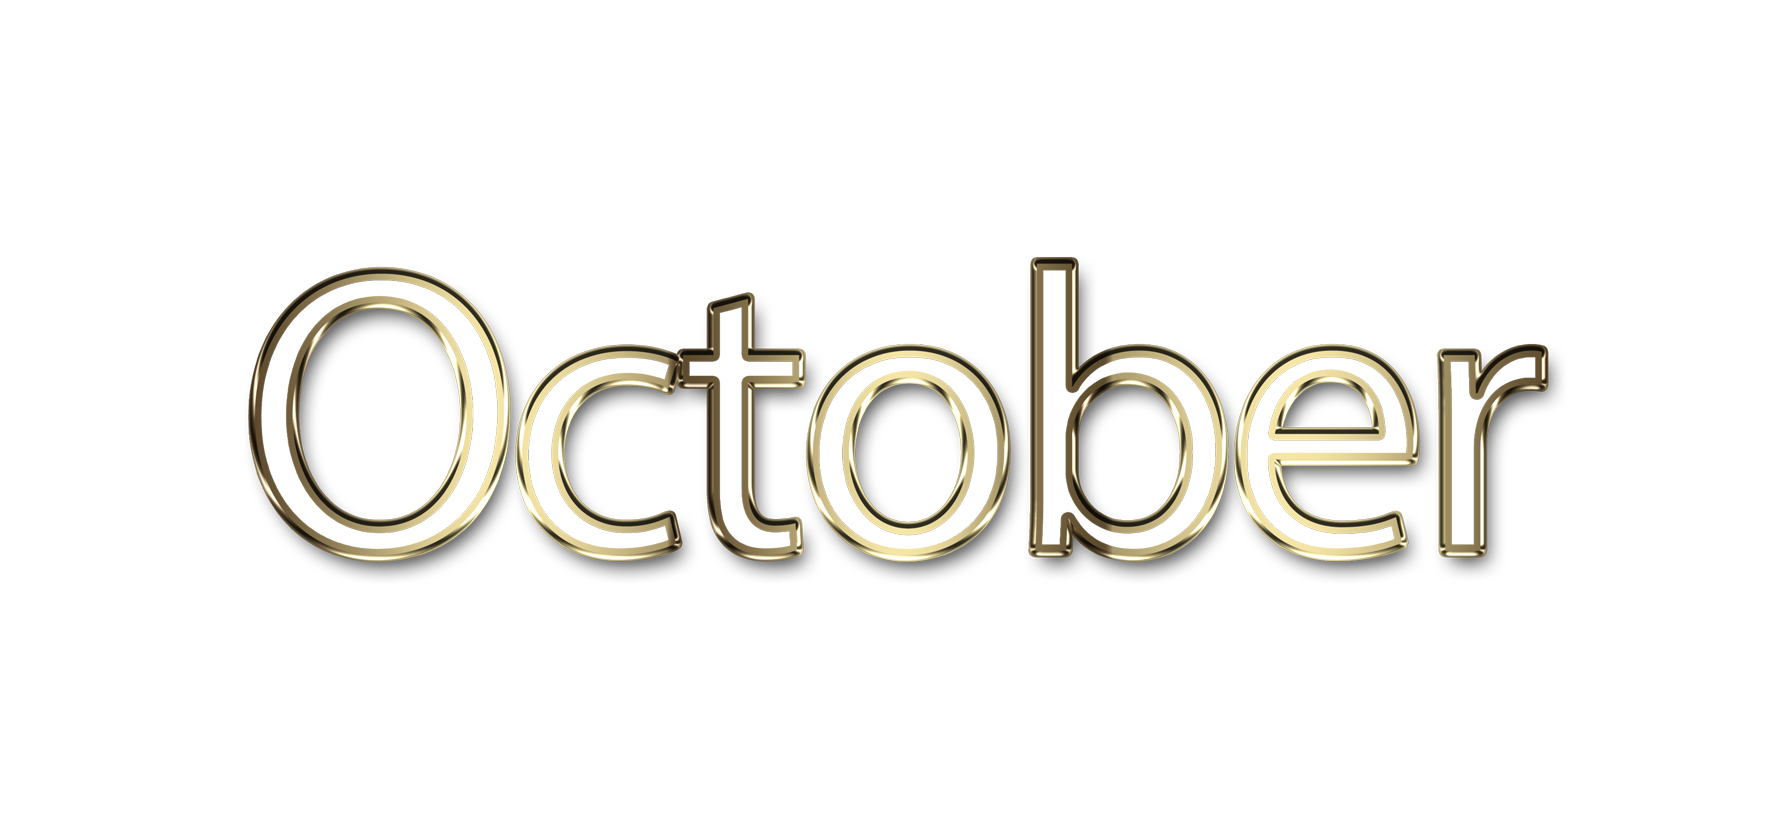 October png, word October png, October word png, October text png, October letters png, October word art typography PNG images, transparent png